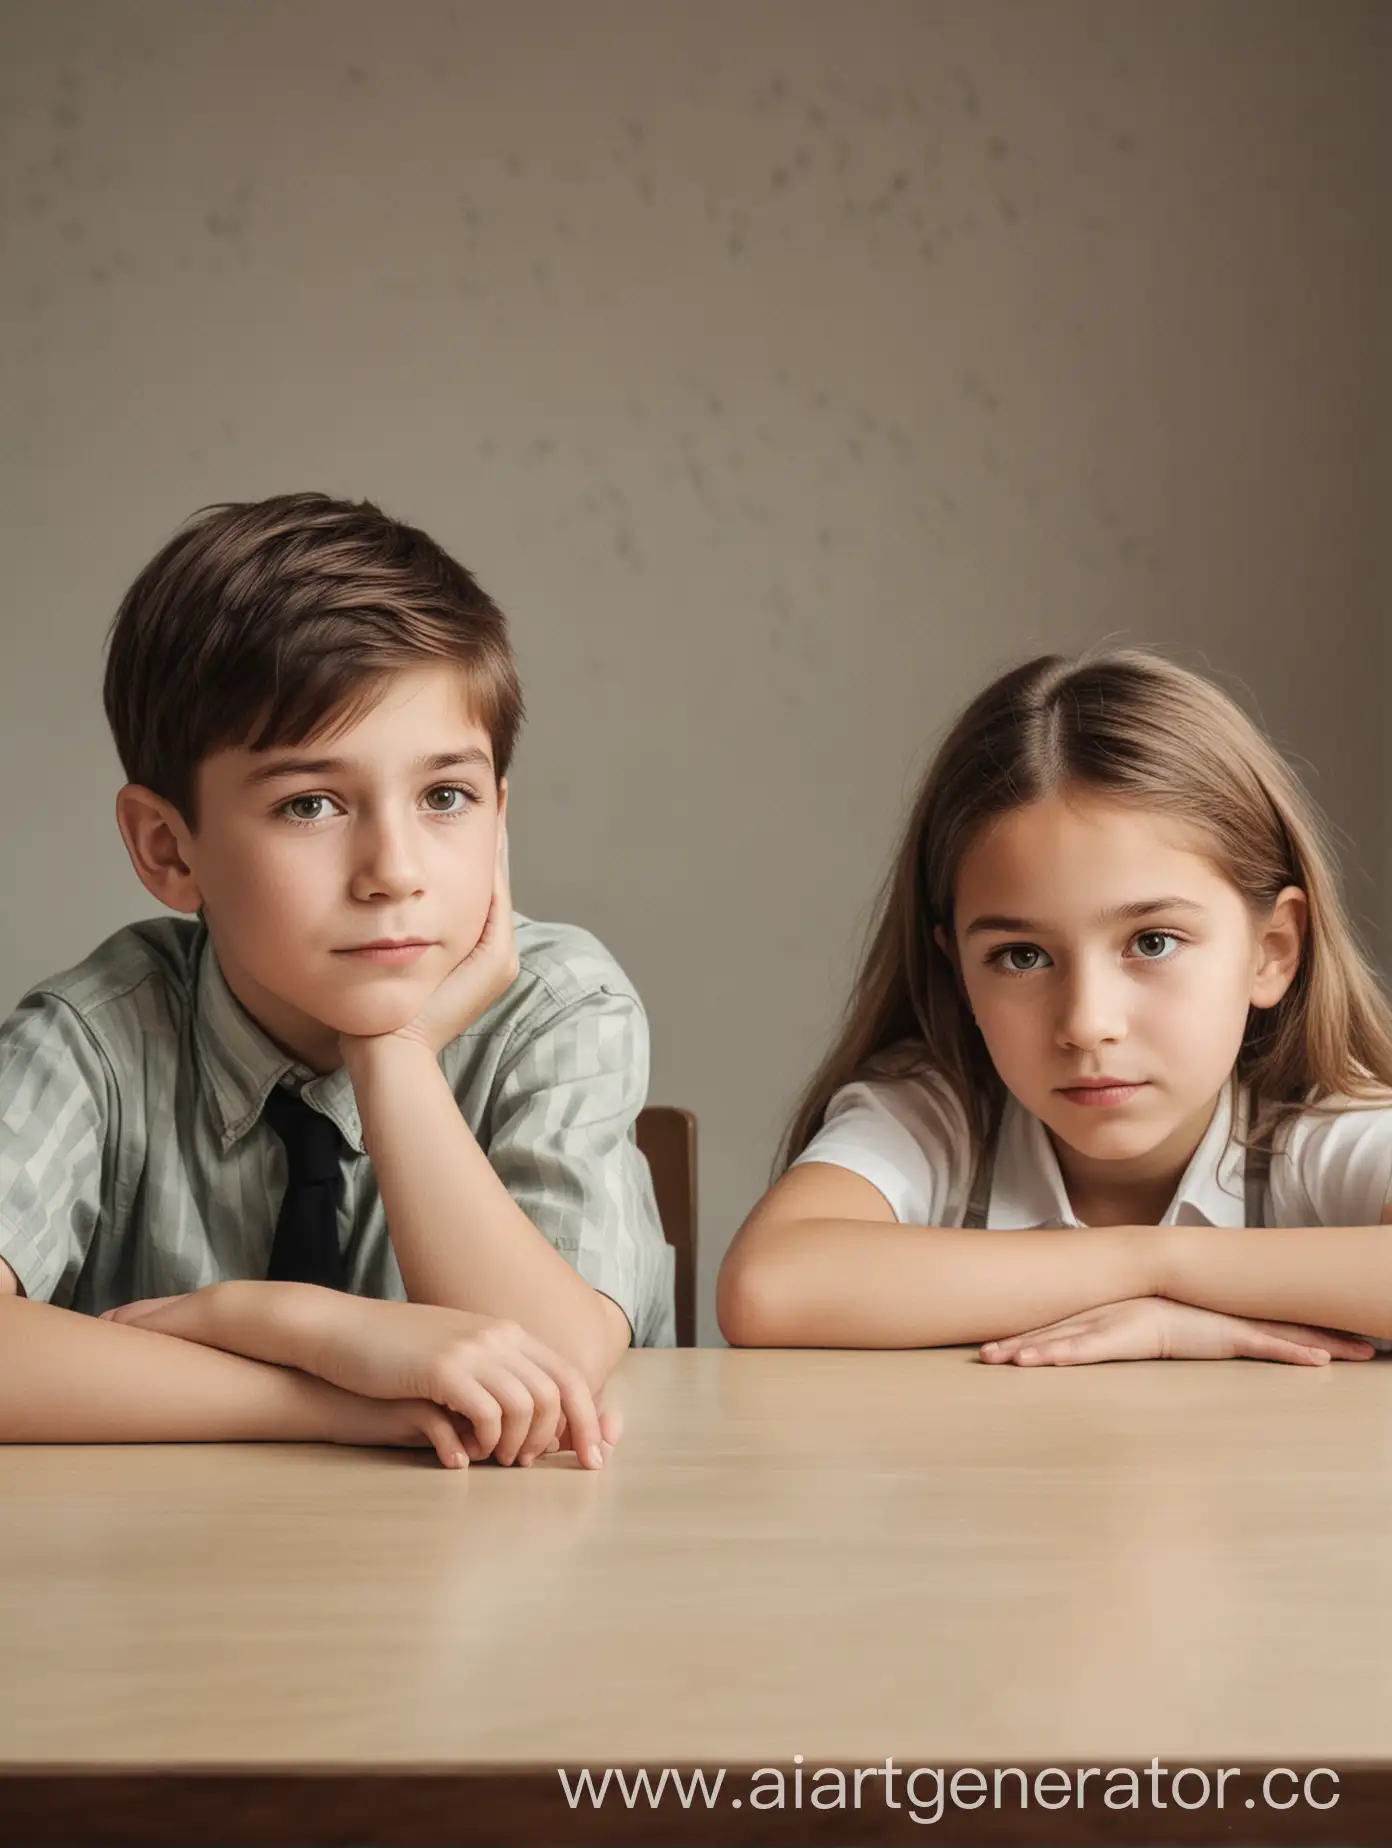 Contemplative-Boy-and-Girl-Sitting-at-Table